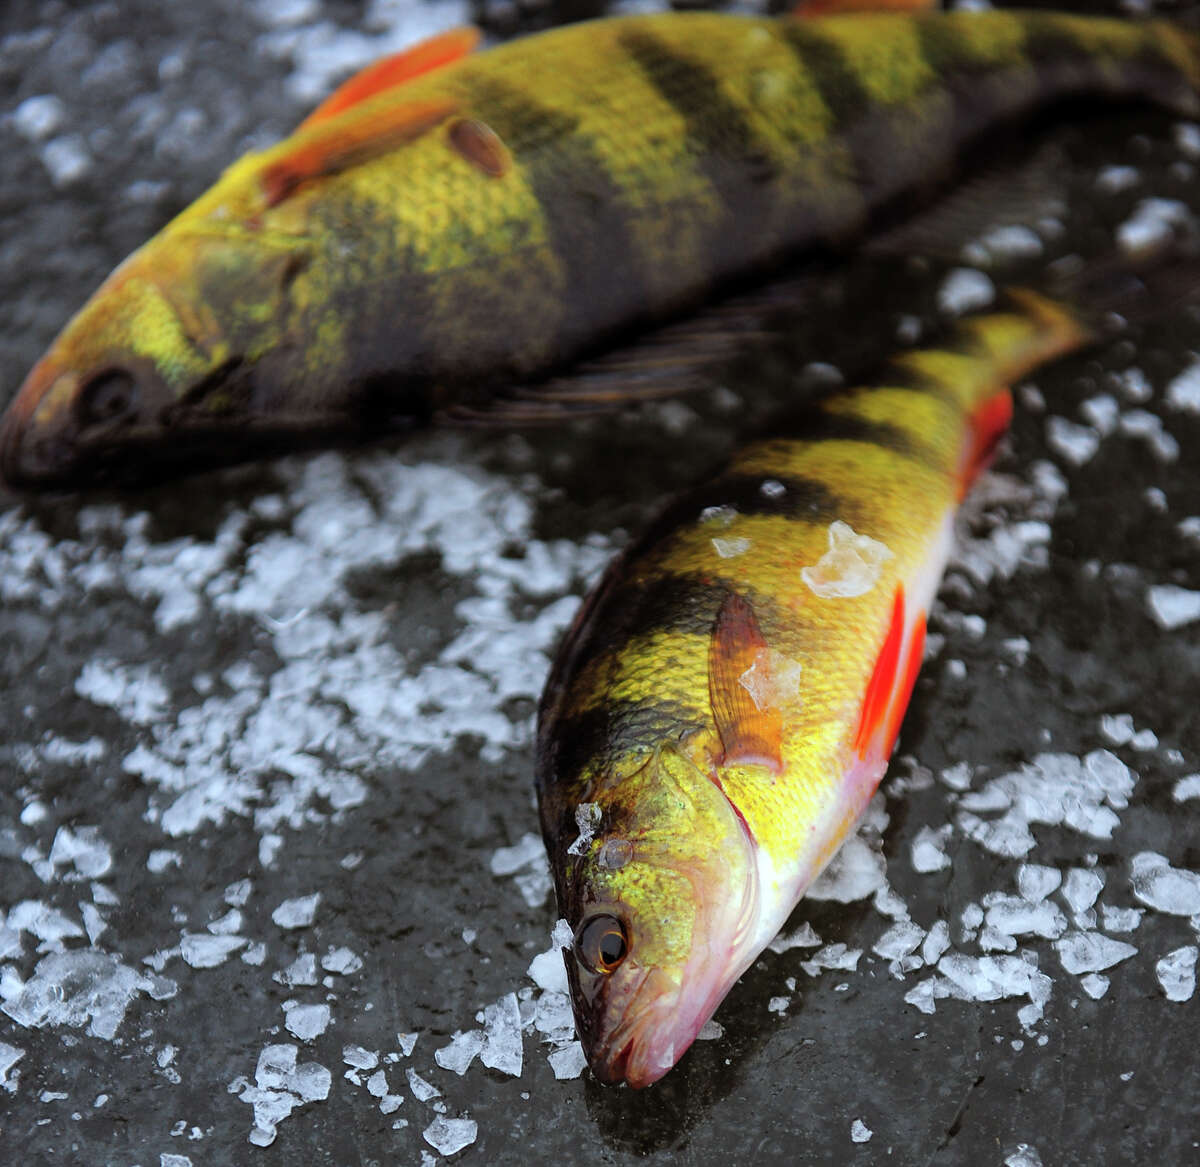 Yellow perch caught during ice fishing at the ever popular Pink House Cove on the Housatonic River in Derby, Conn. on Wednesday Jan. 21, 2015.